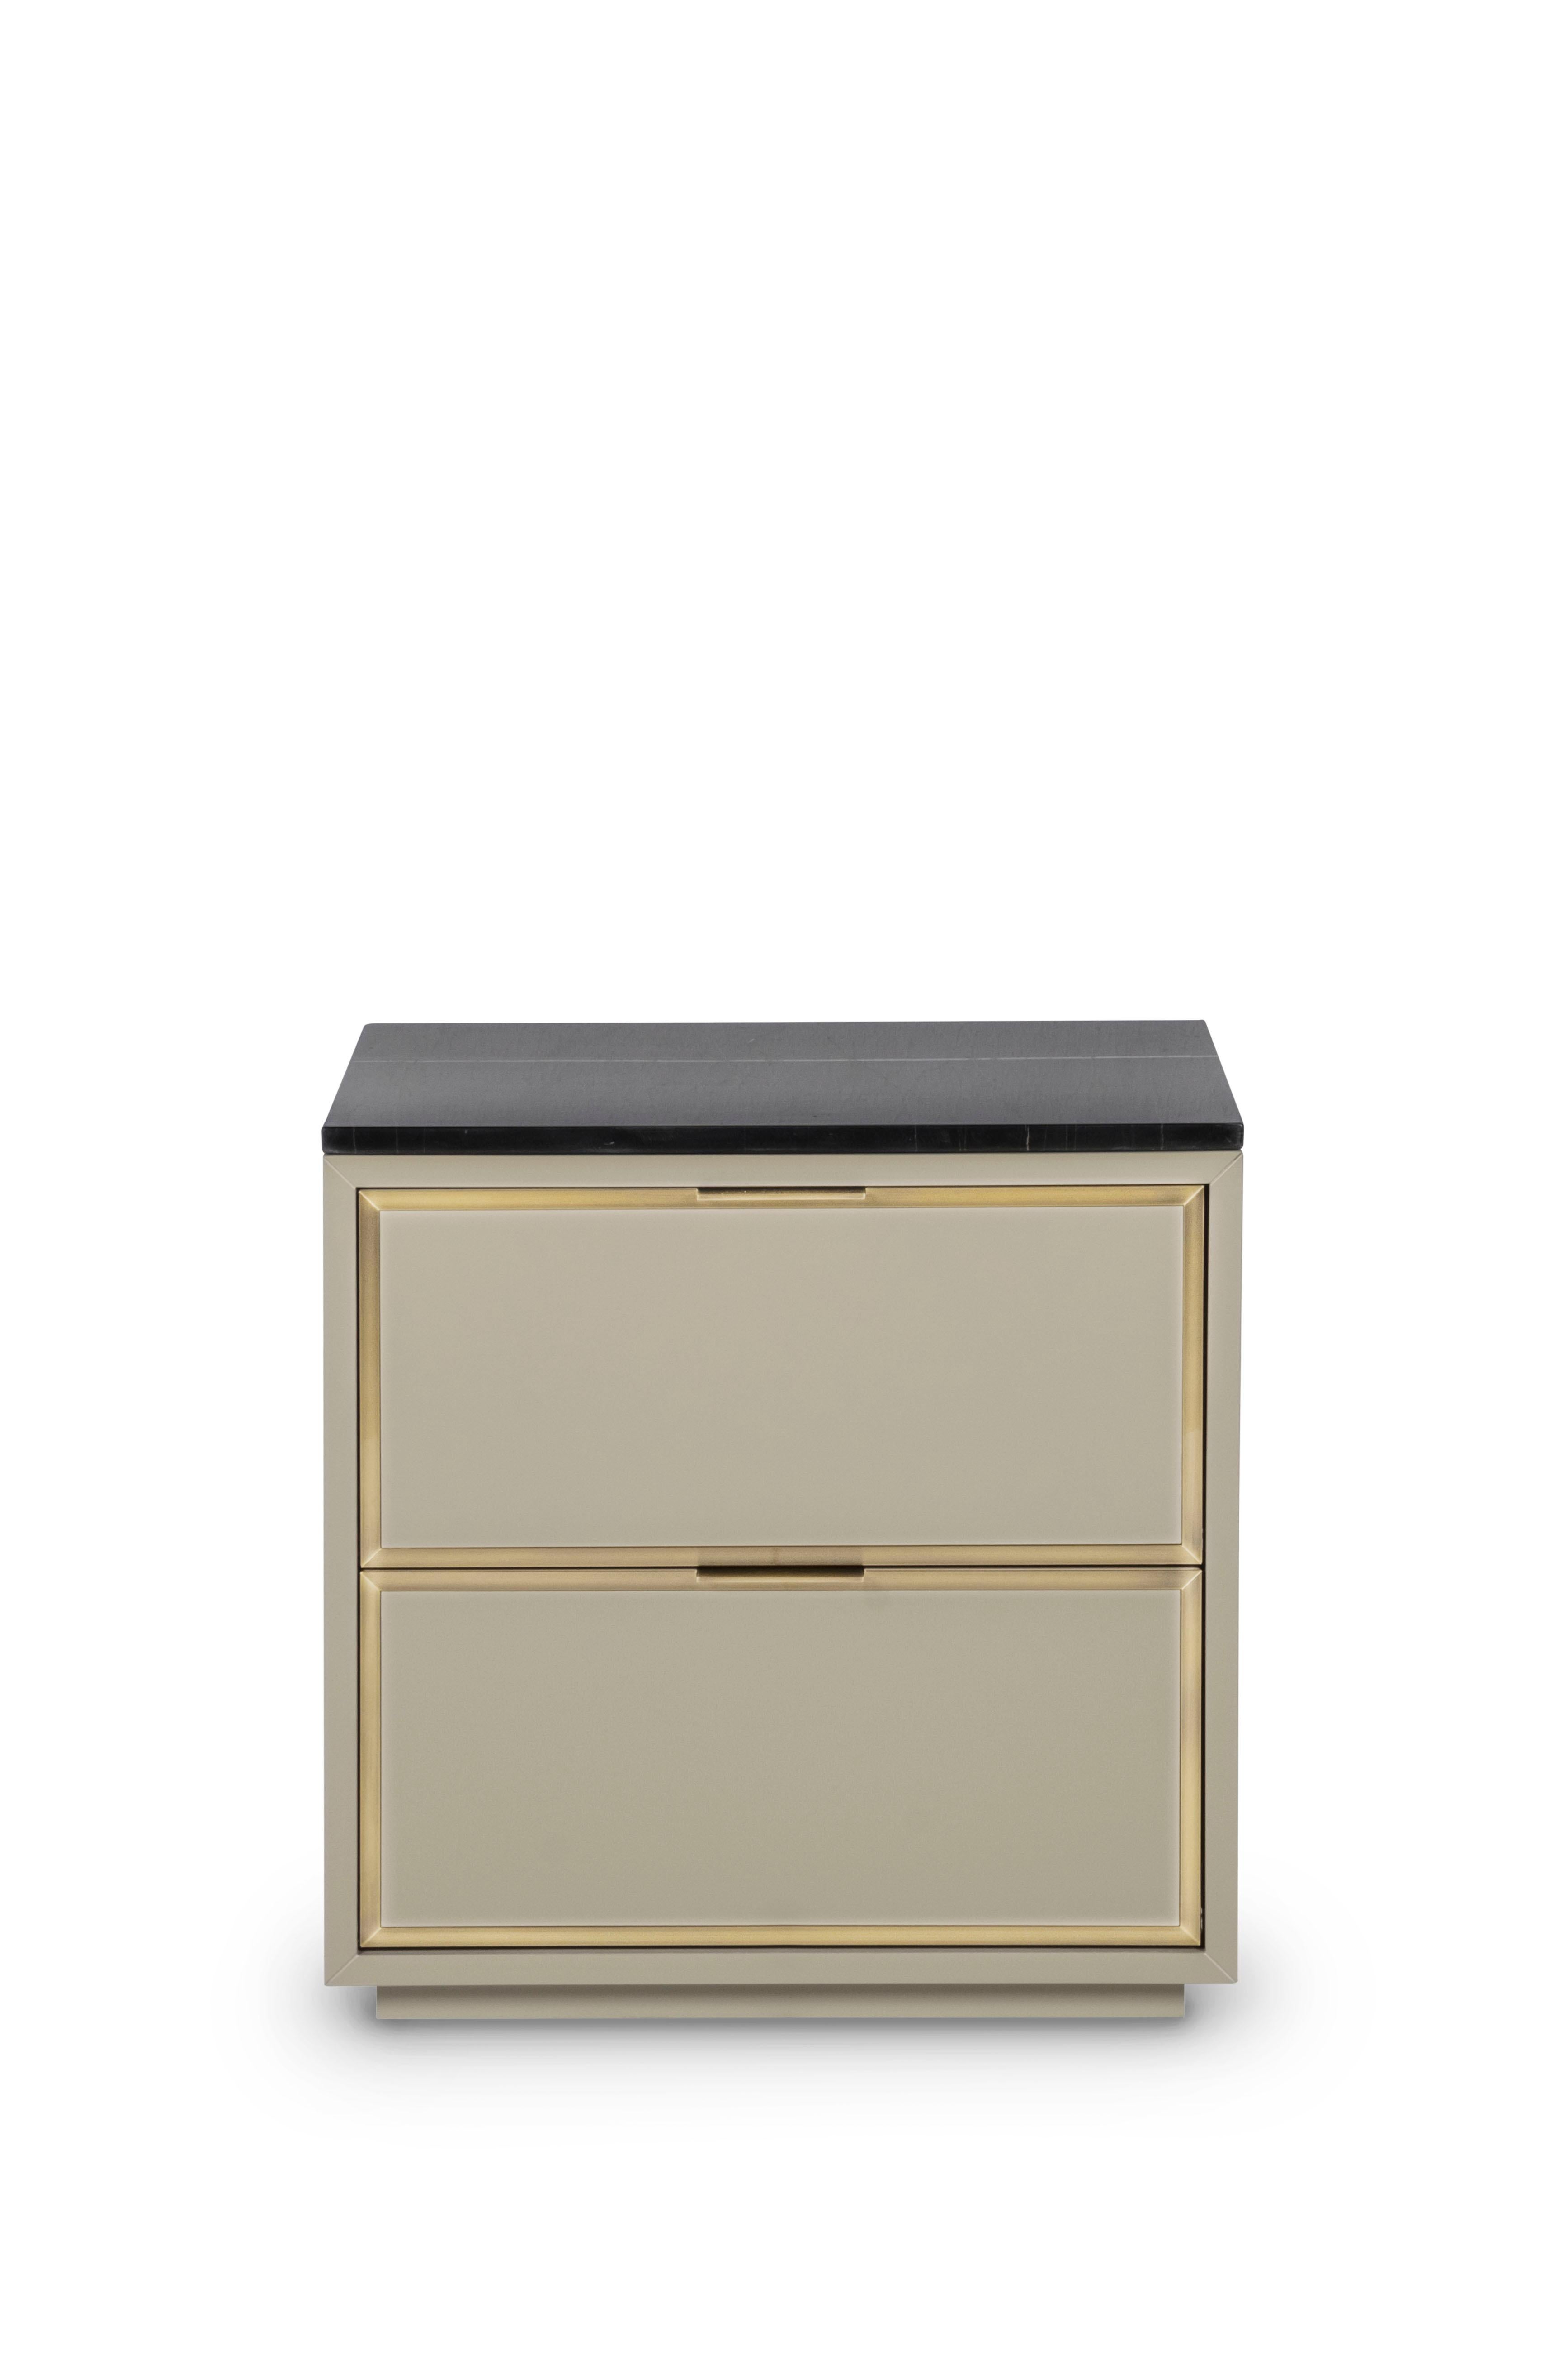 Coupe bedside table, Contemporary Collection, handcrafted in Portugal - Europe by Greenapple.

The Coupe bedside table offers a timeless design for your comfort. Coupe is a greenish-grey lacquered wooden bedside table with a satin finish that